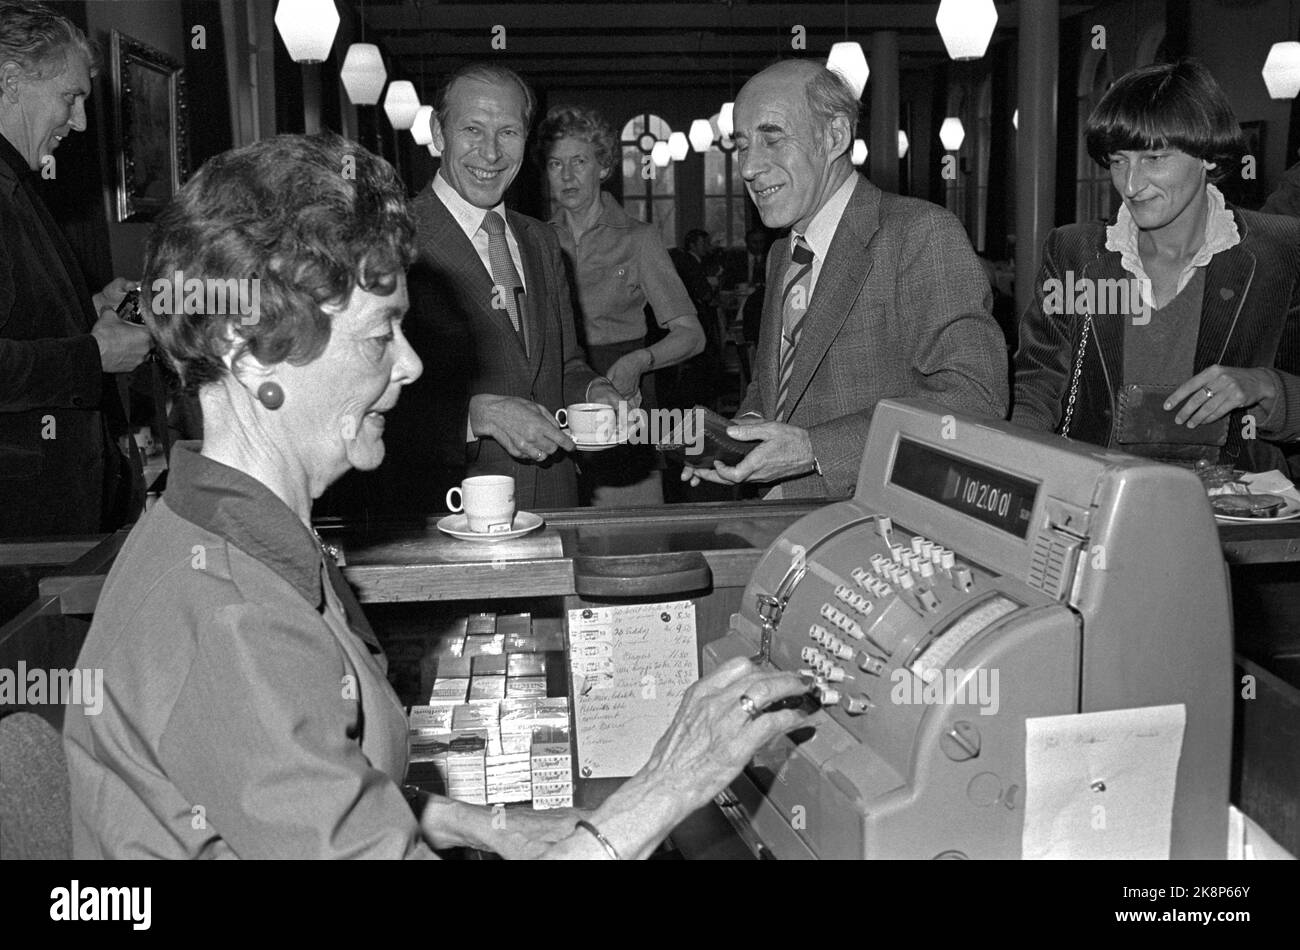 Oslo 19790529. Haukvik - Nordli. The canteen lady beats amounts at the cash register in the Storting's canteen, May 29, 1979. From: Small Council Olav Haukvik (Ap), Storting President Guttorm Hansen (Ap) and Sissel Rønbeck. Prime Minister Haukvik had just submitted his speech in the Tandberg case in the Storting. Photo: Bjørn Sigurdsøn/NTB Stock Photo